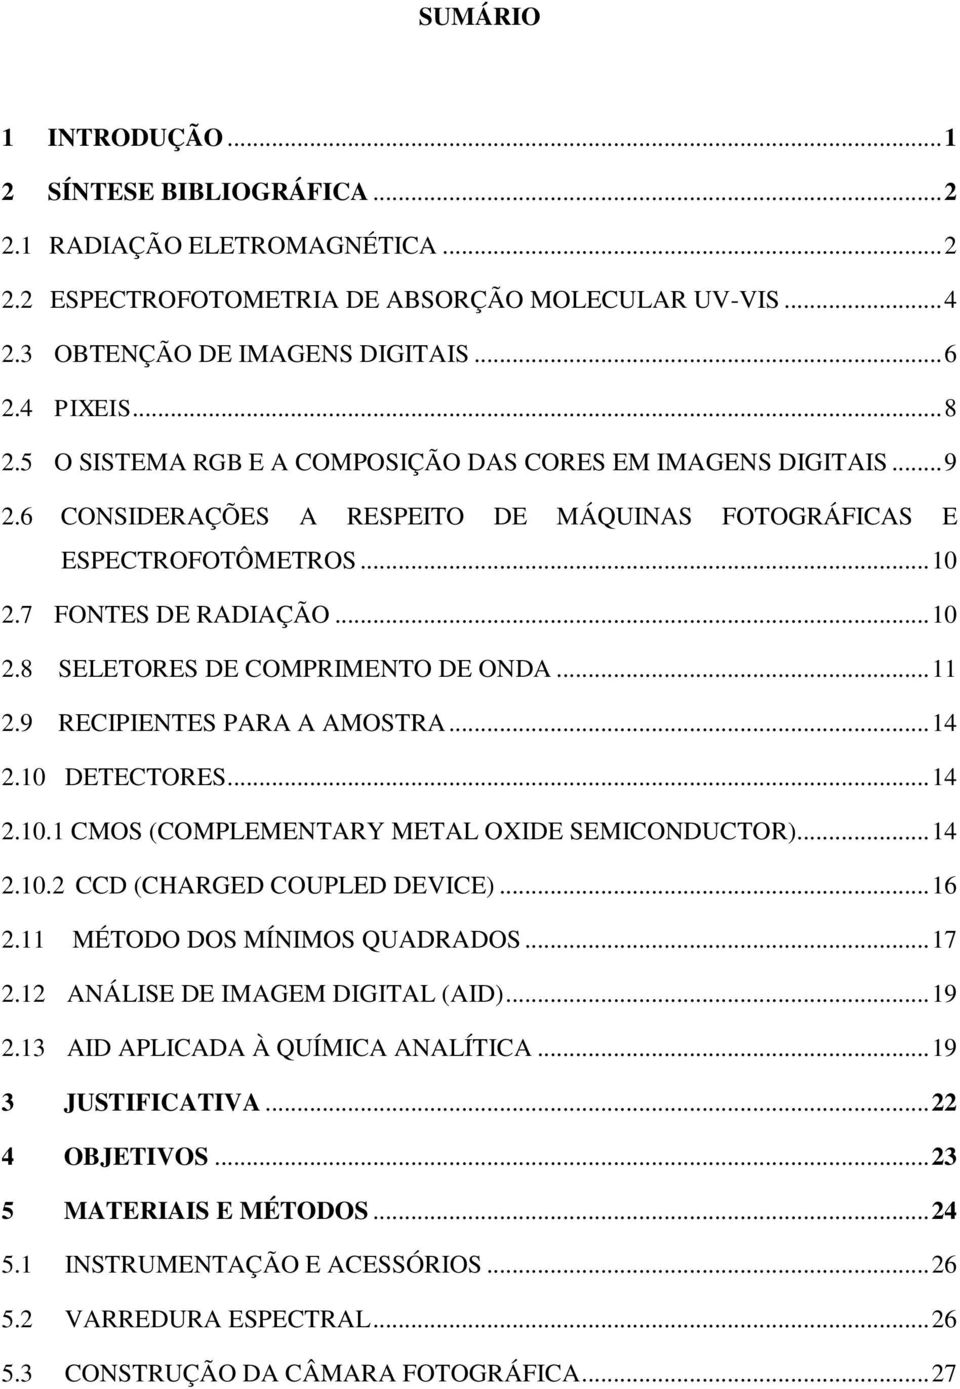 .. 11 2.9 RECIPIENTES PARA A AMOSTRA... 14 2.10 DETECTORES... 14 2.10.1 CMOS (COMPLEMENTARY METAL OXIDE SEMICONDUCTOR)... 14 2.10.2 CCD (CHARGED COUPLED DEVICE)... 16 2.